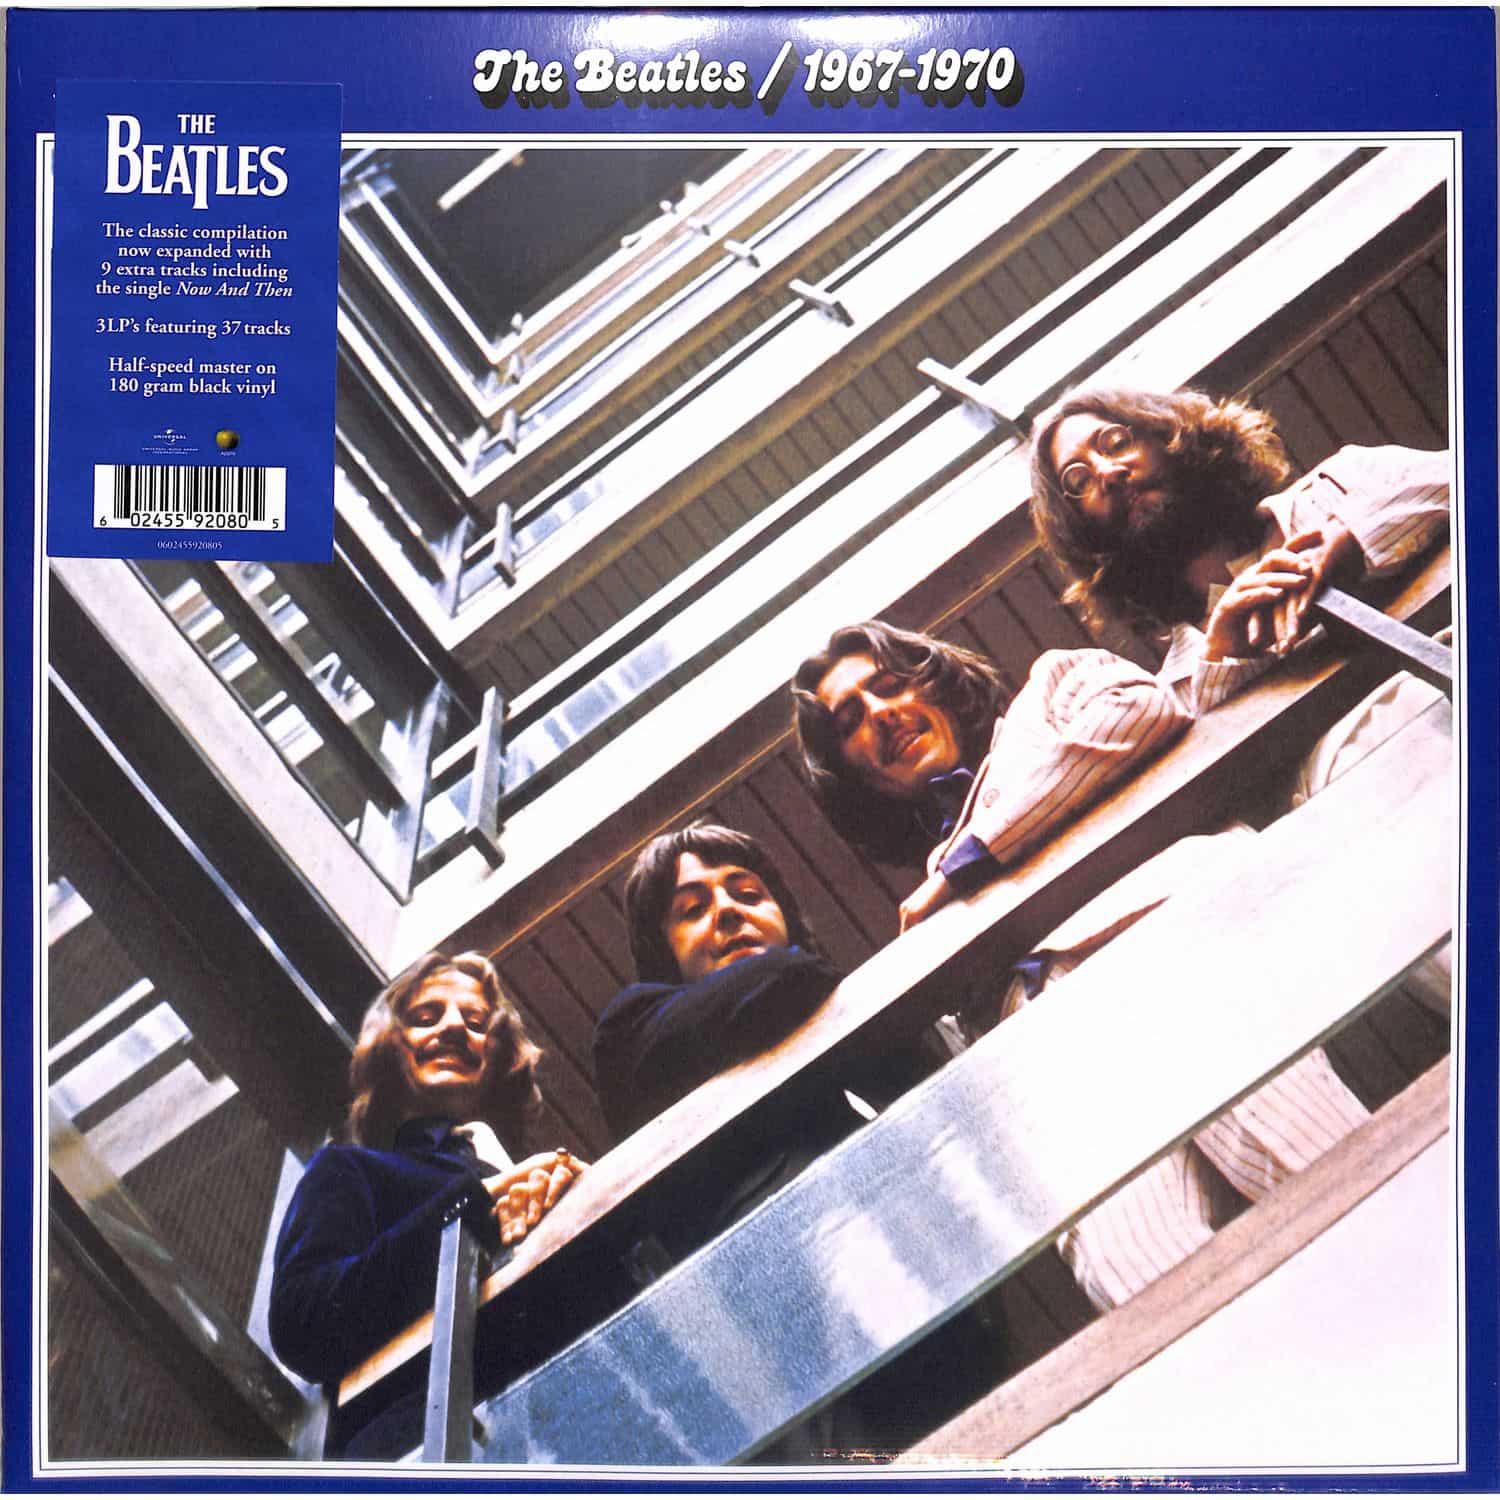 The Beatles - THE BEATLES 1967 - 1970 